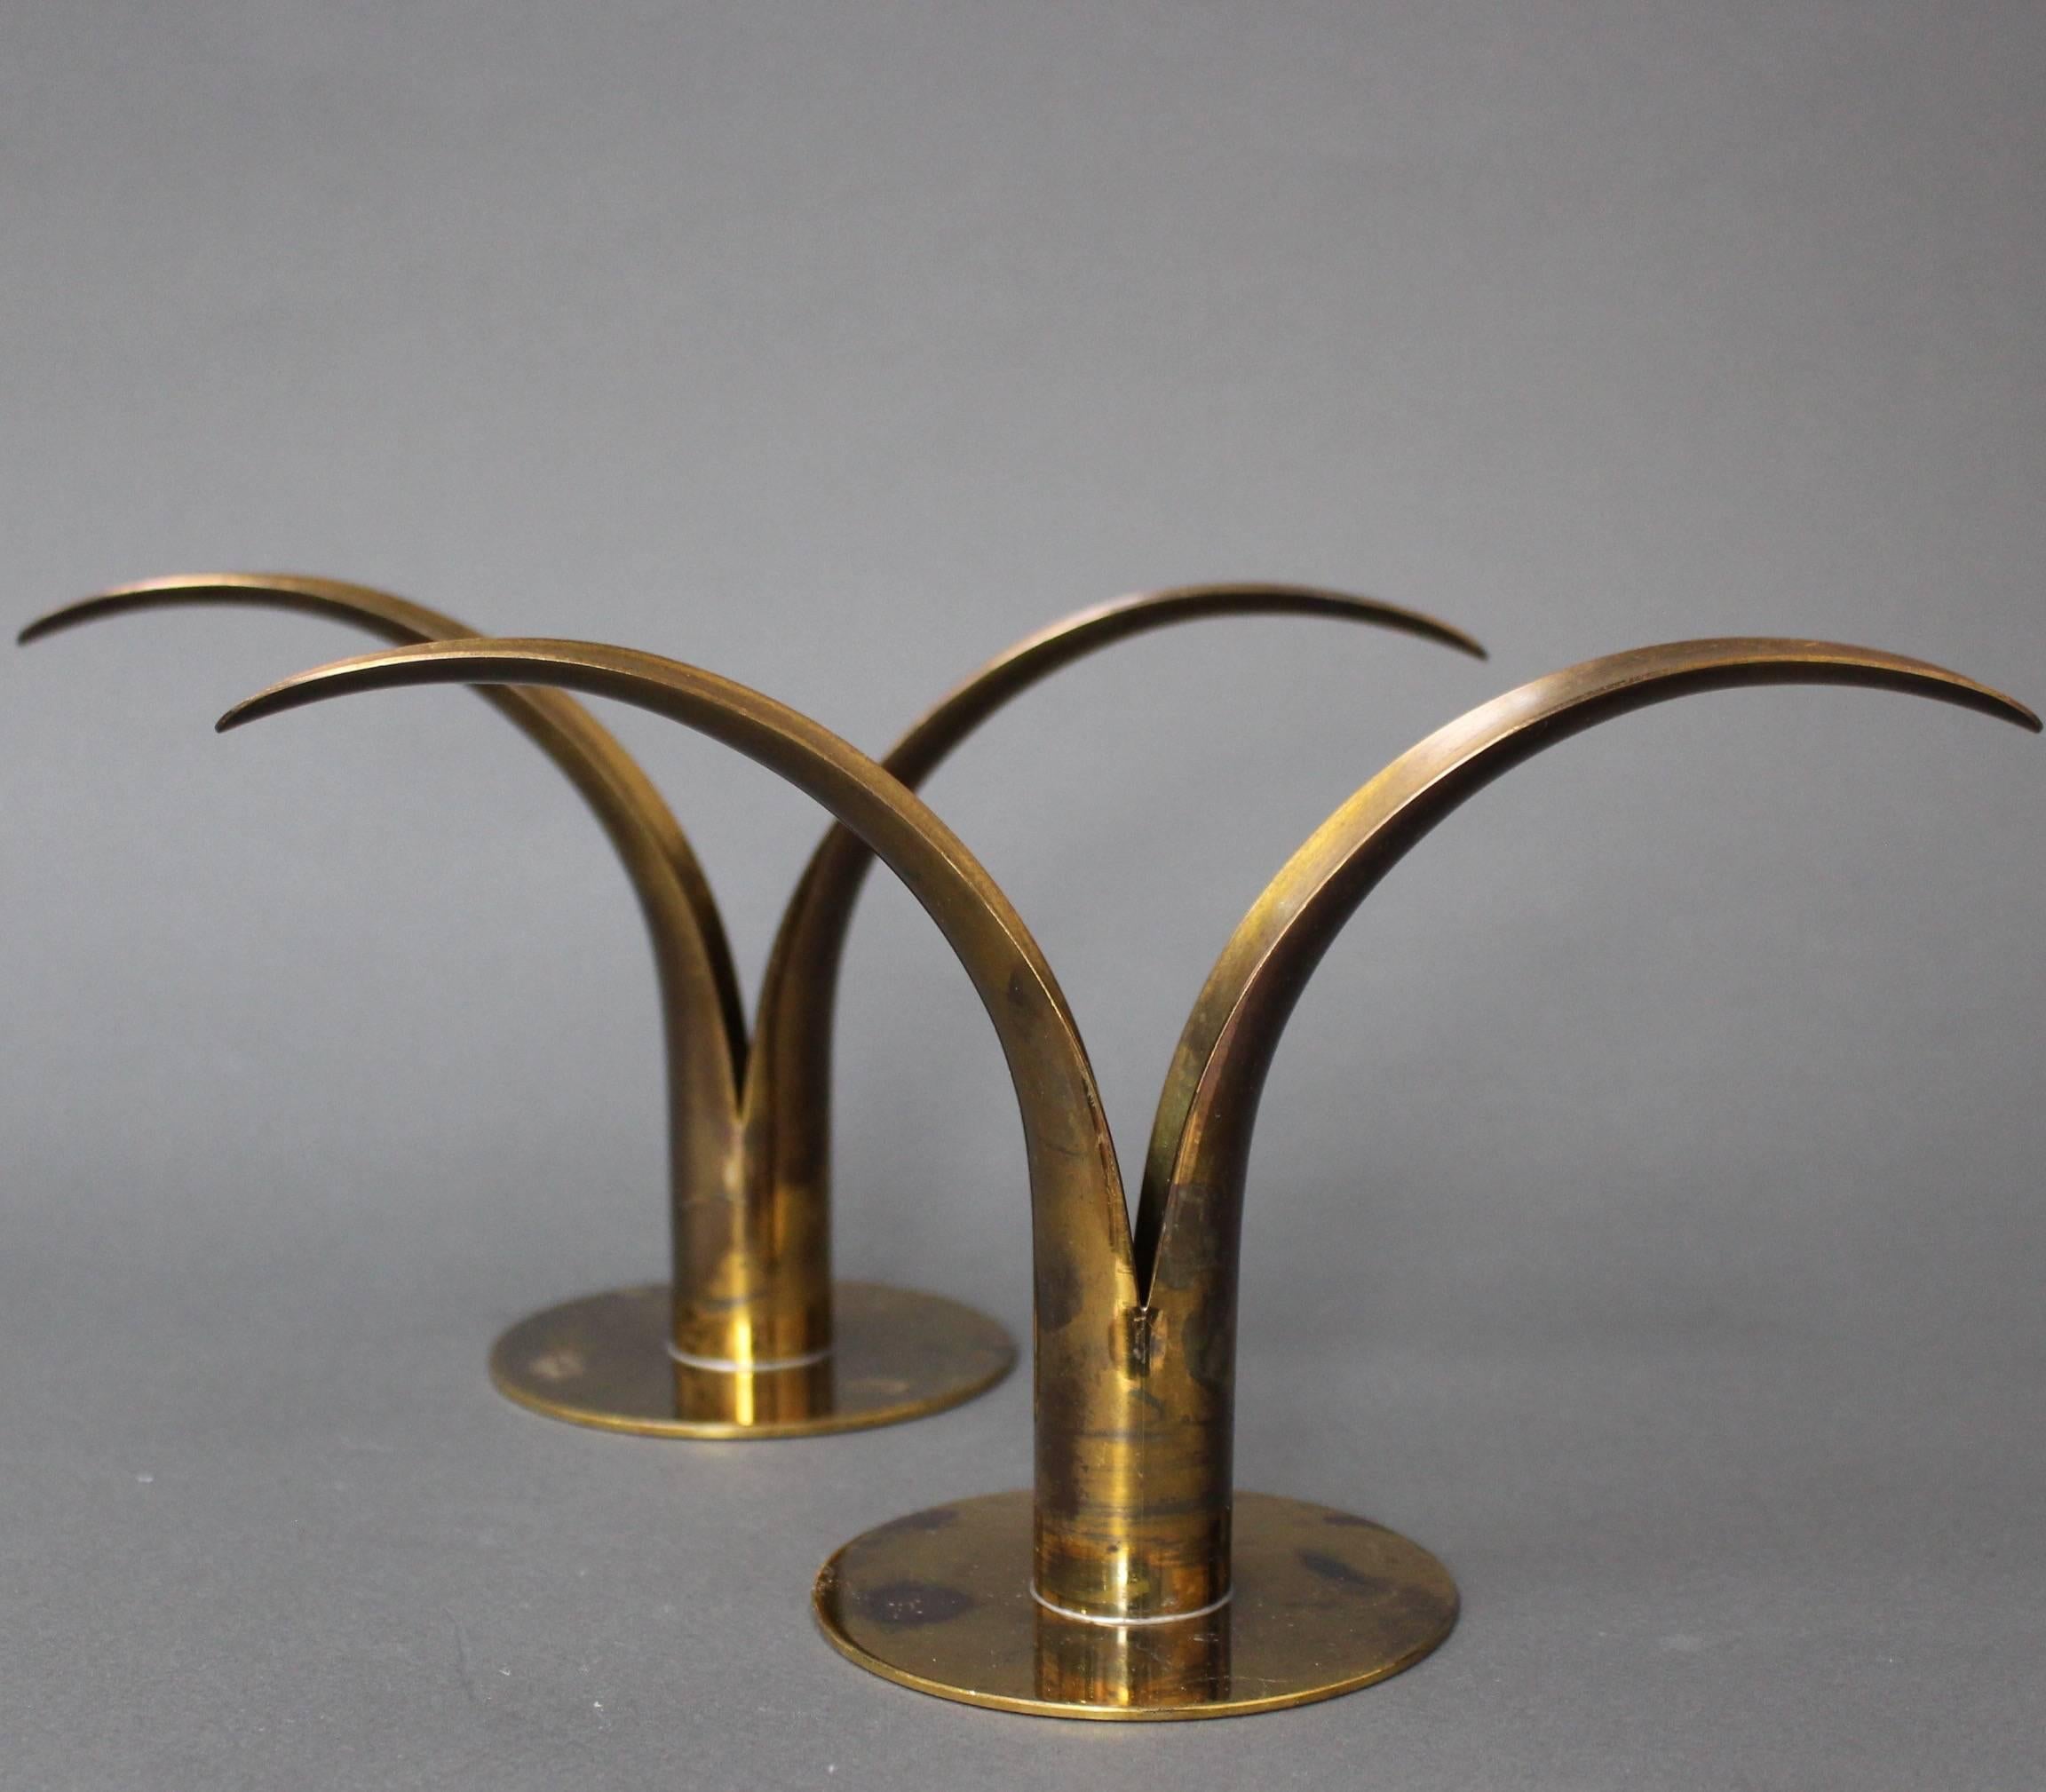 A pair of midcentury split leaf lily brass-plated candle holders by Scan, Sweden. Elegant, graceful and very stylish candle holders with an aged patina. A video clip of this piece may be provided upon request.

Dimensions:
W 22 cm (8.66